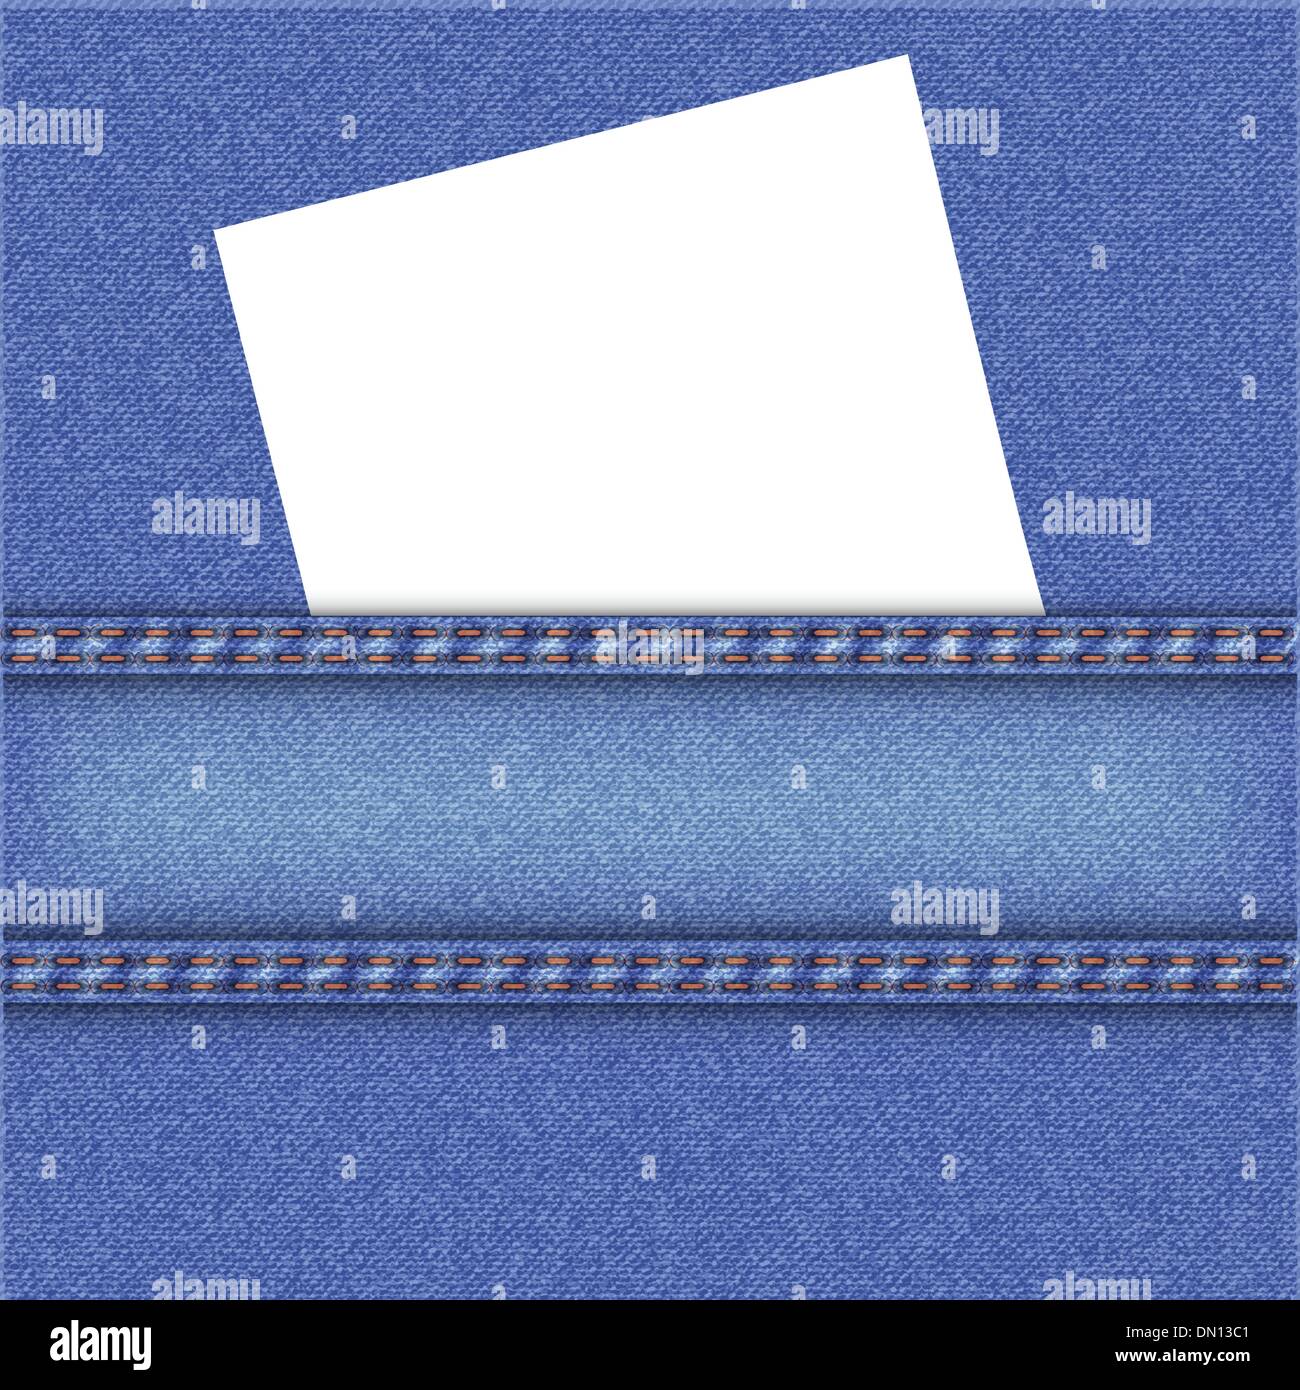 Vector illustration of jeans background with white note paper. Stock Vector